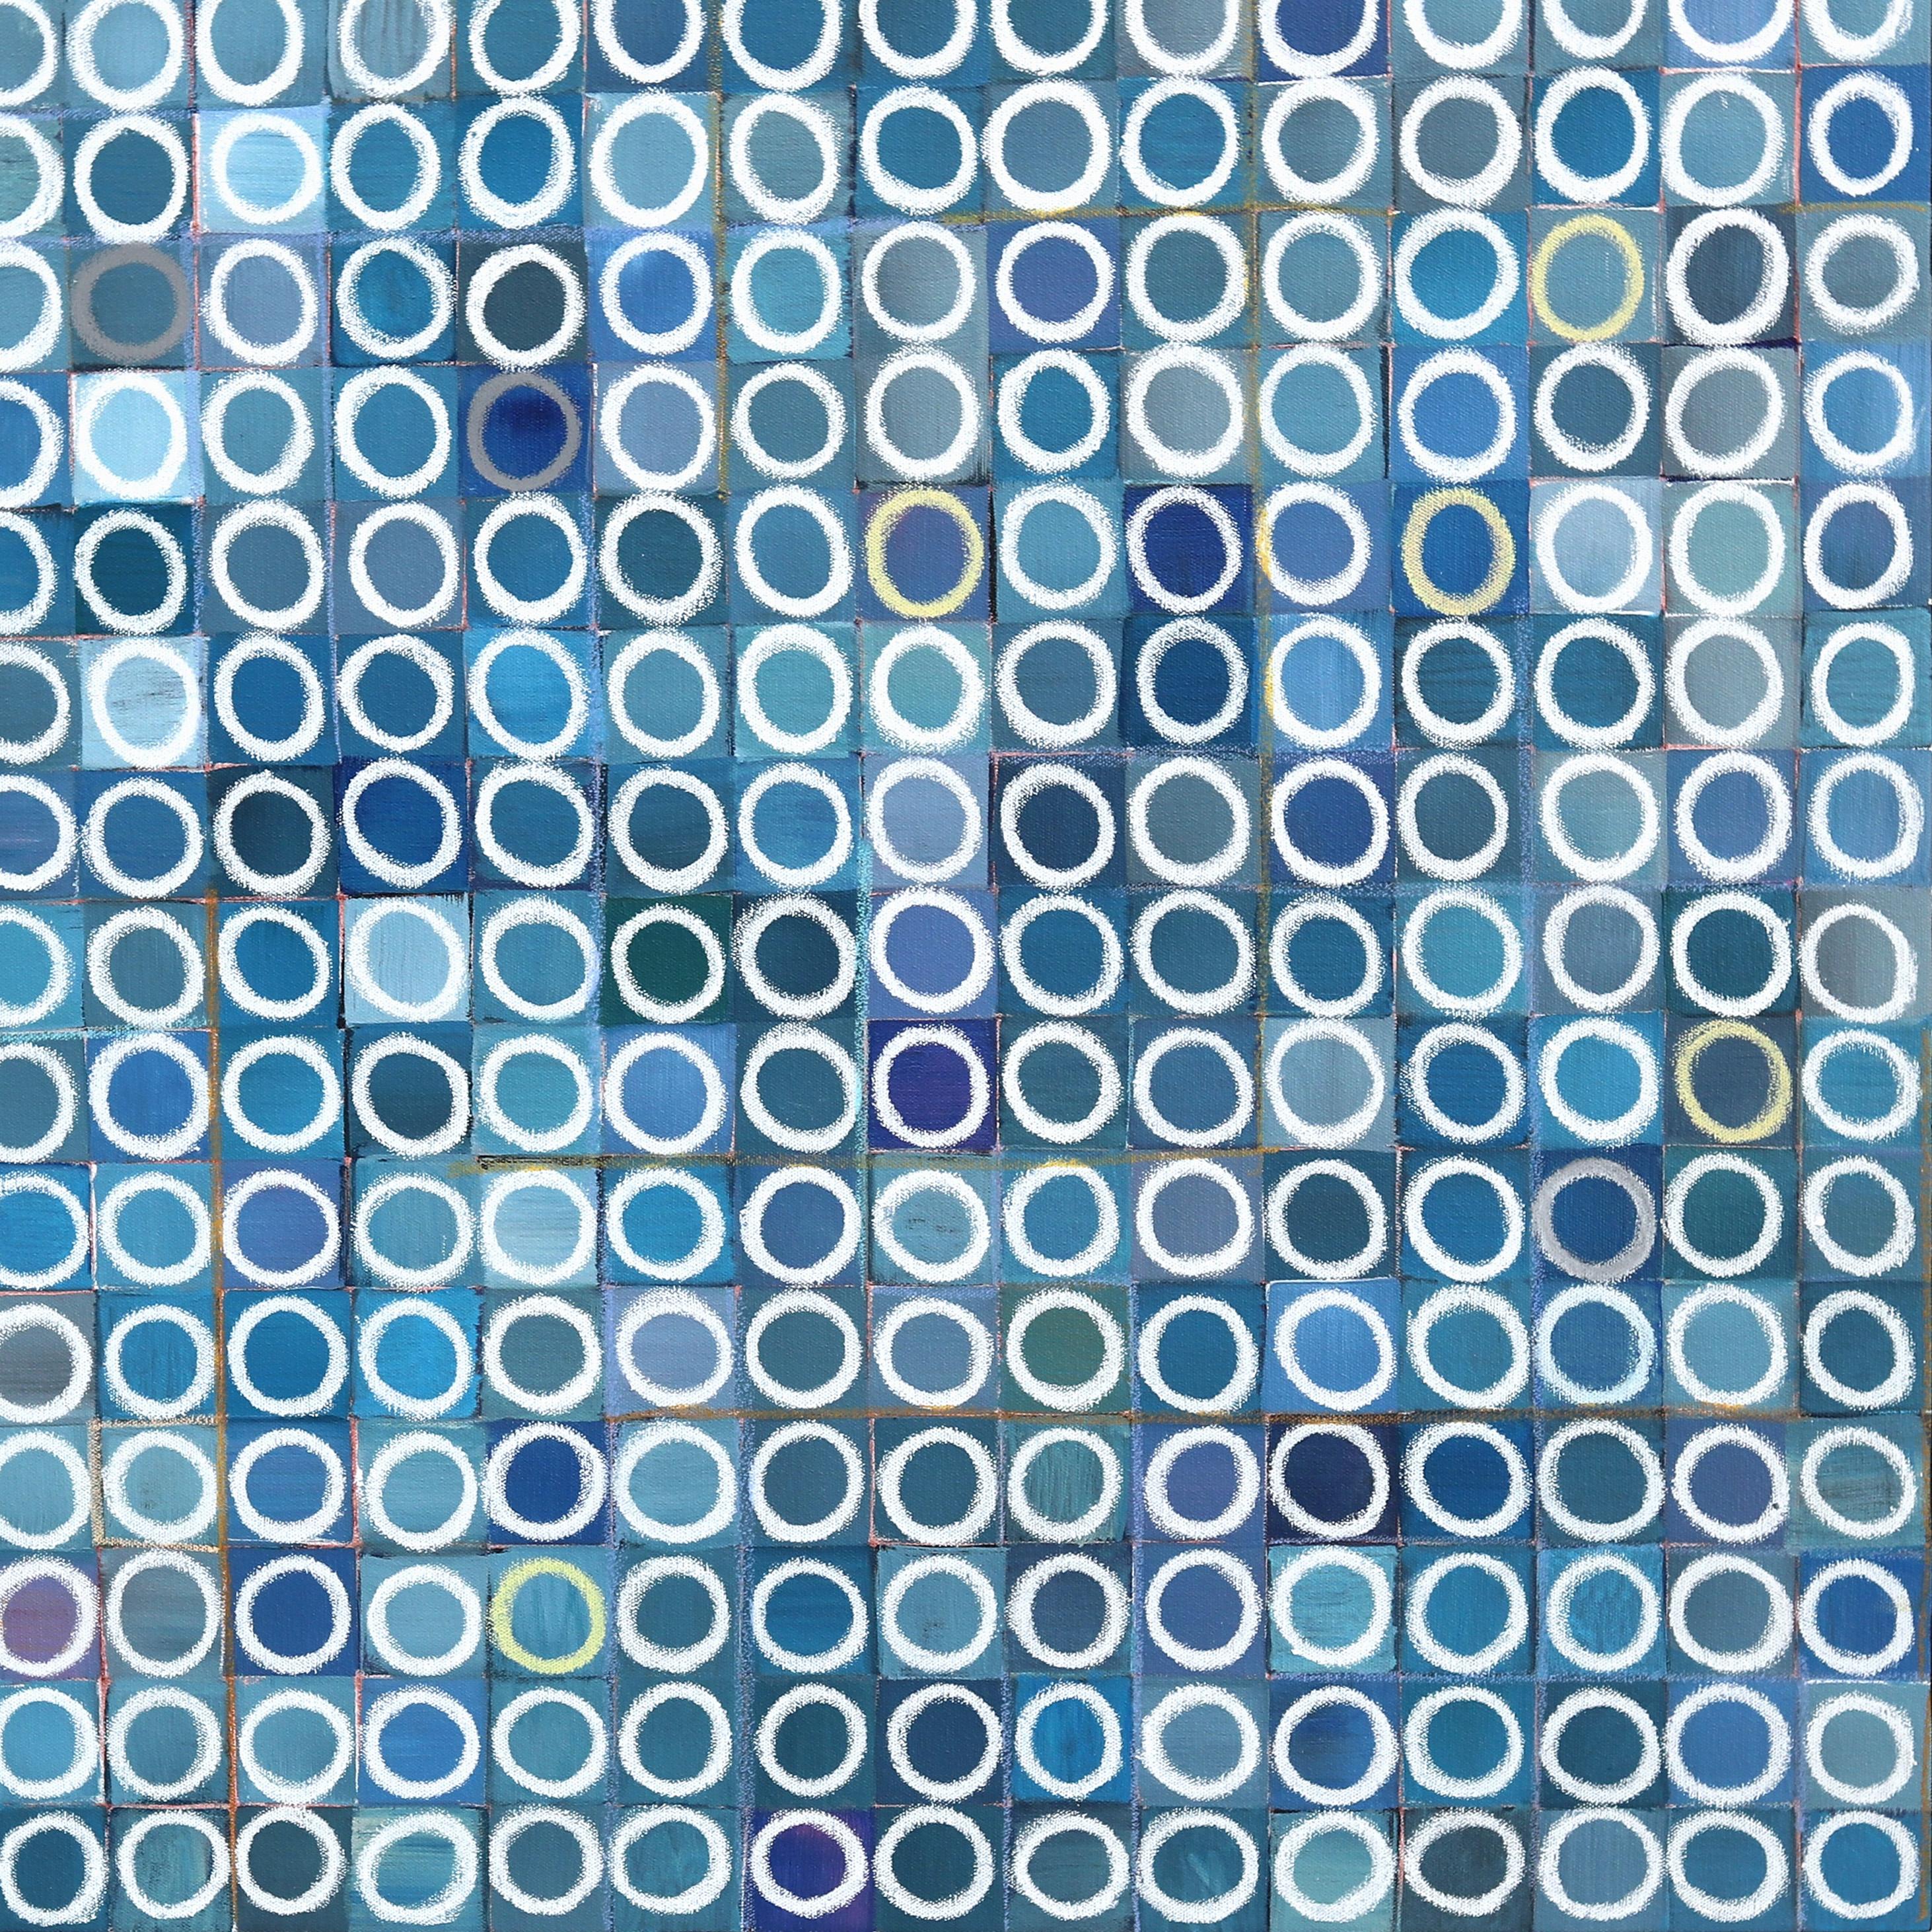 1089 Circles - Large Blue Abstract Geometric Original Painting For Sale 6